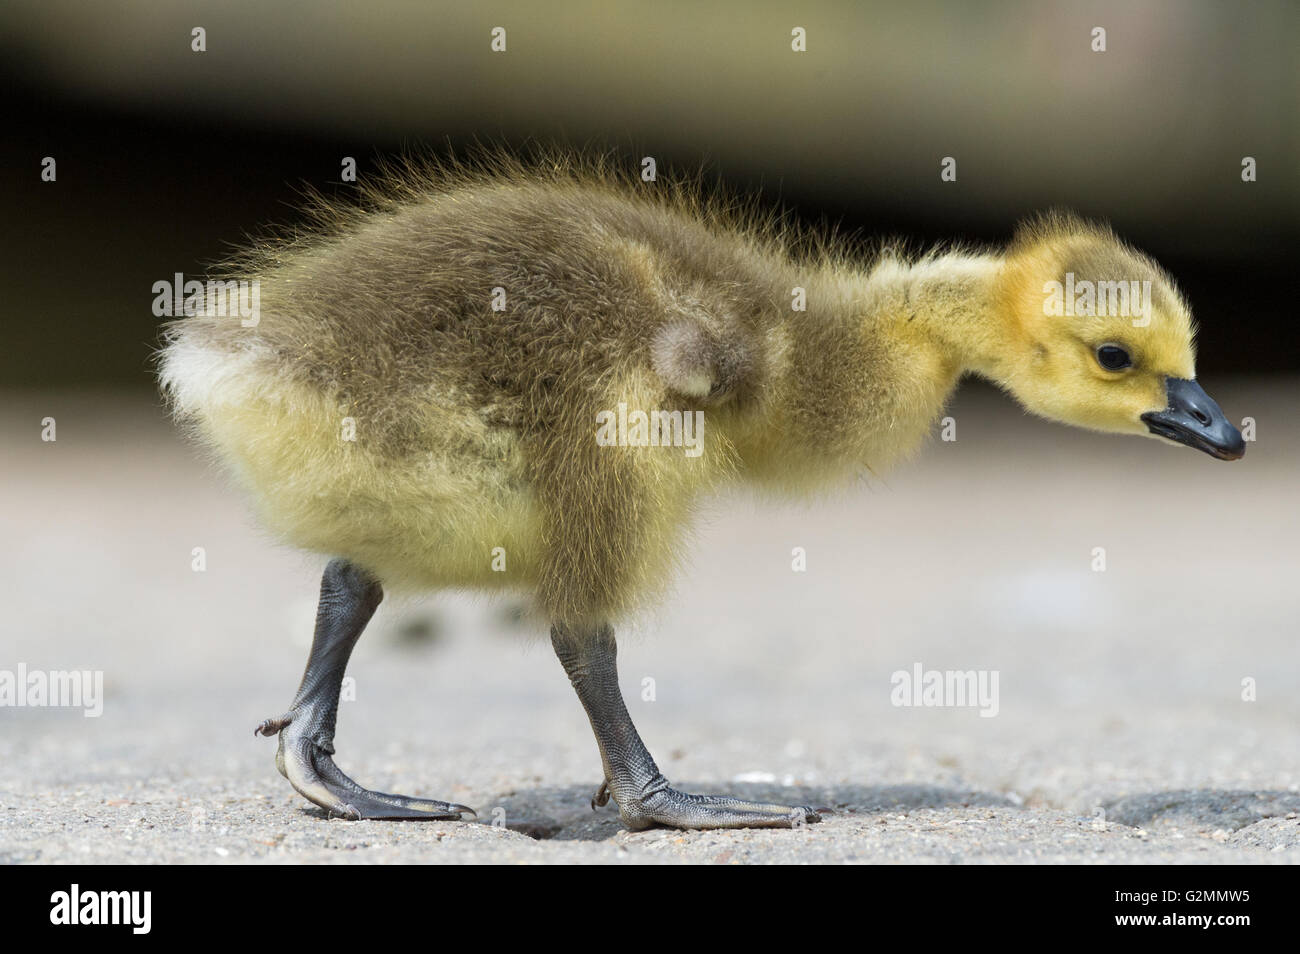 Canadian Geese chicks with their yellow fluffy feather down. Stock Photo